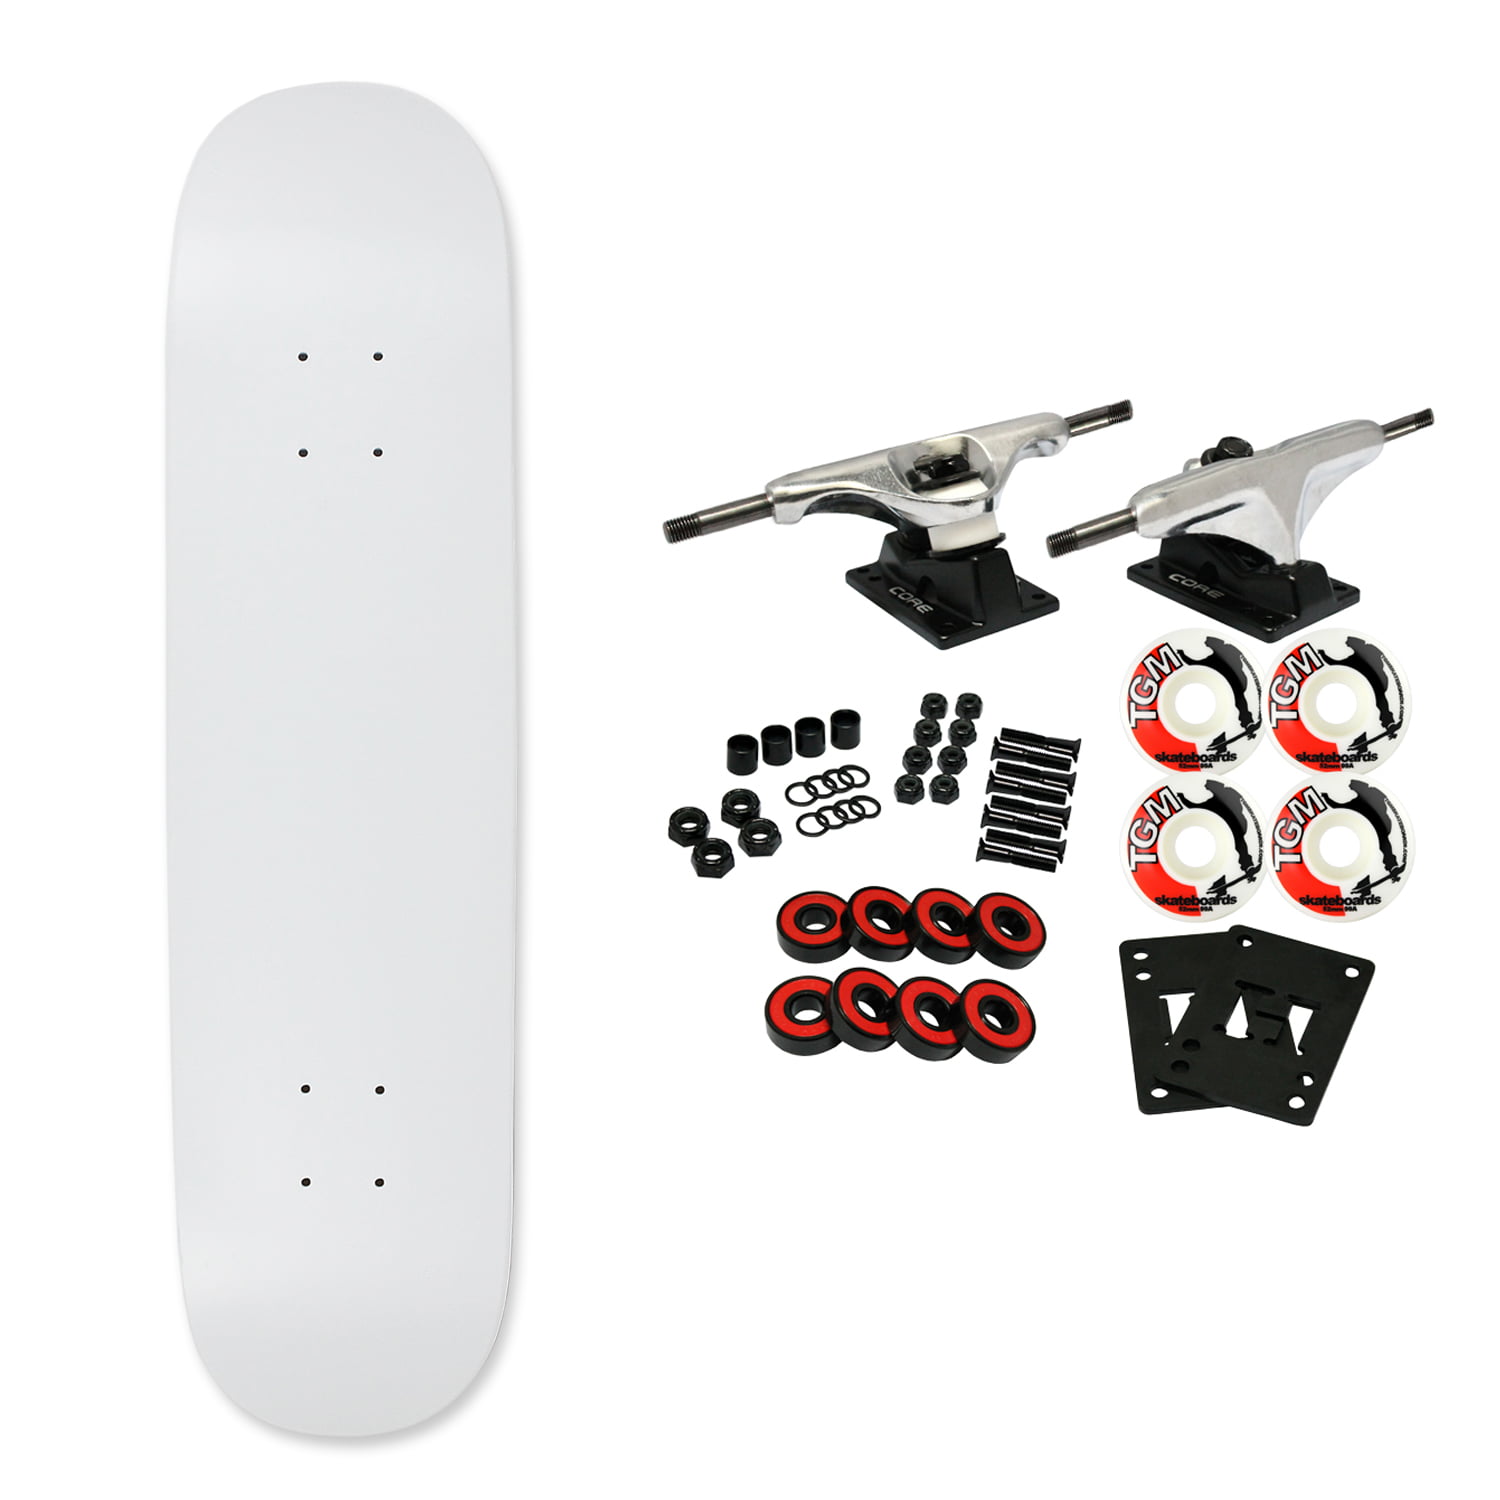 Blank Skateboard Complete 8.0" White with Silver Trucks and Black Wheels